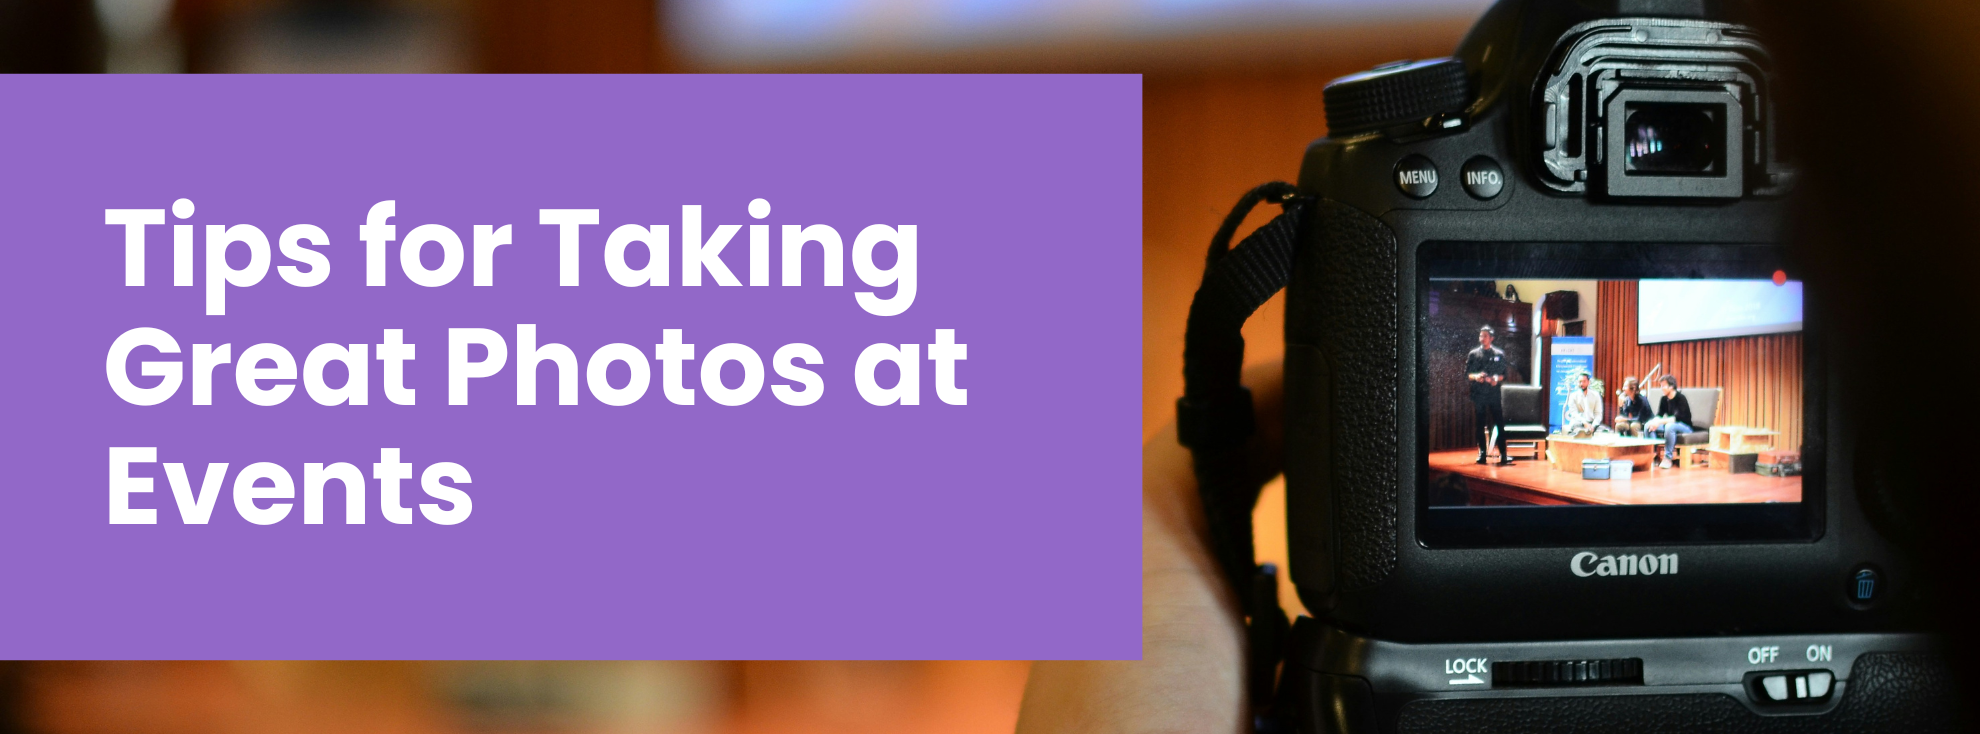 Tips for Taking Great Photos at Events